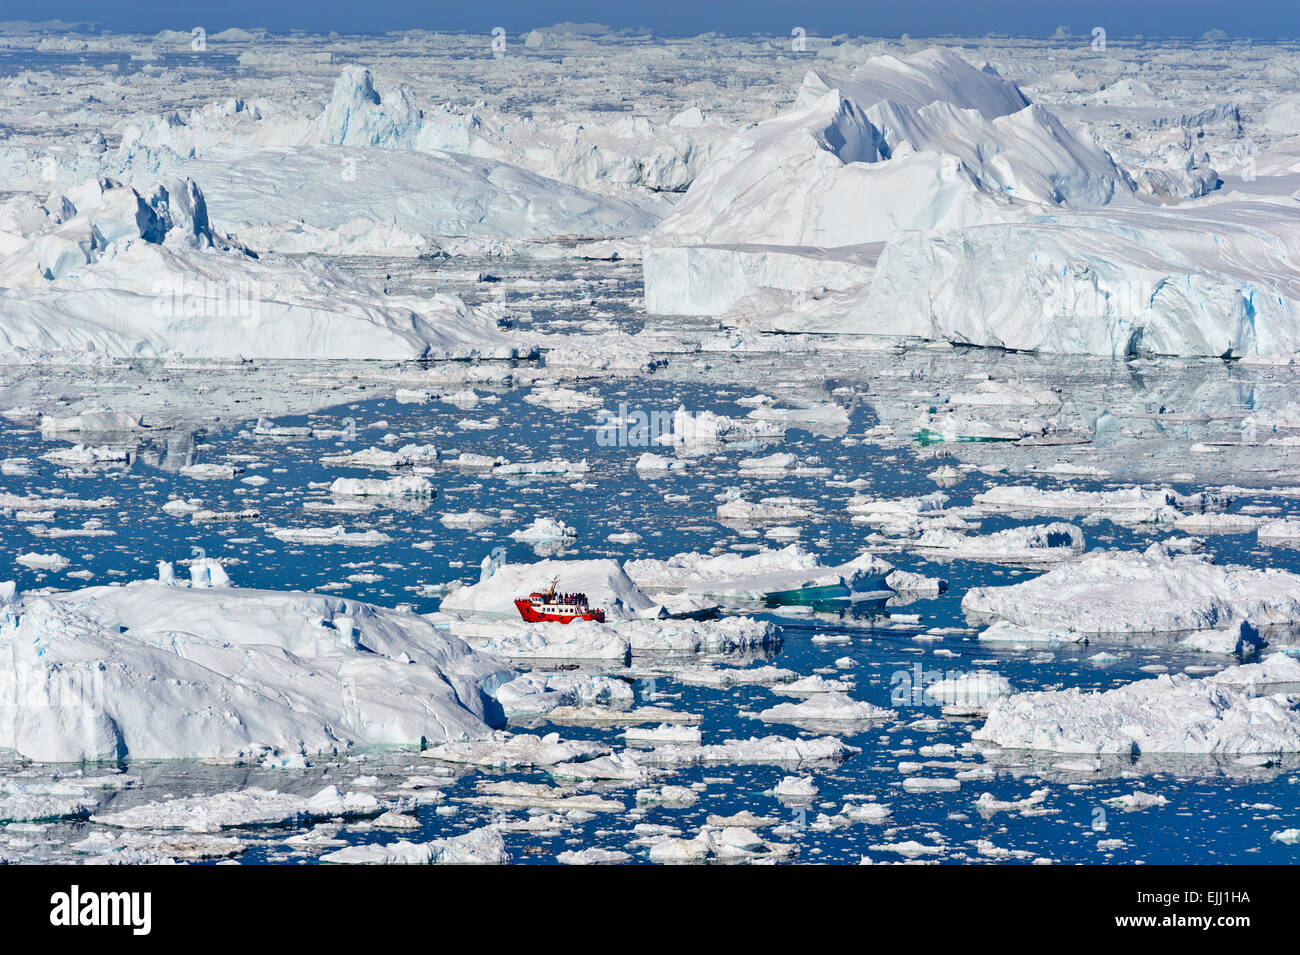 View overlooking the icefjord of the Jakobshavn glacier, outside Illulisat, Greenland. These icebergs are calved by the Jakobsha Stock Photo